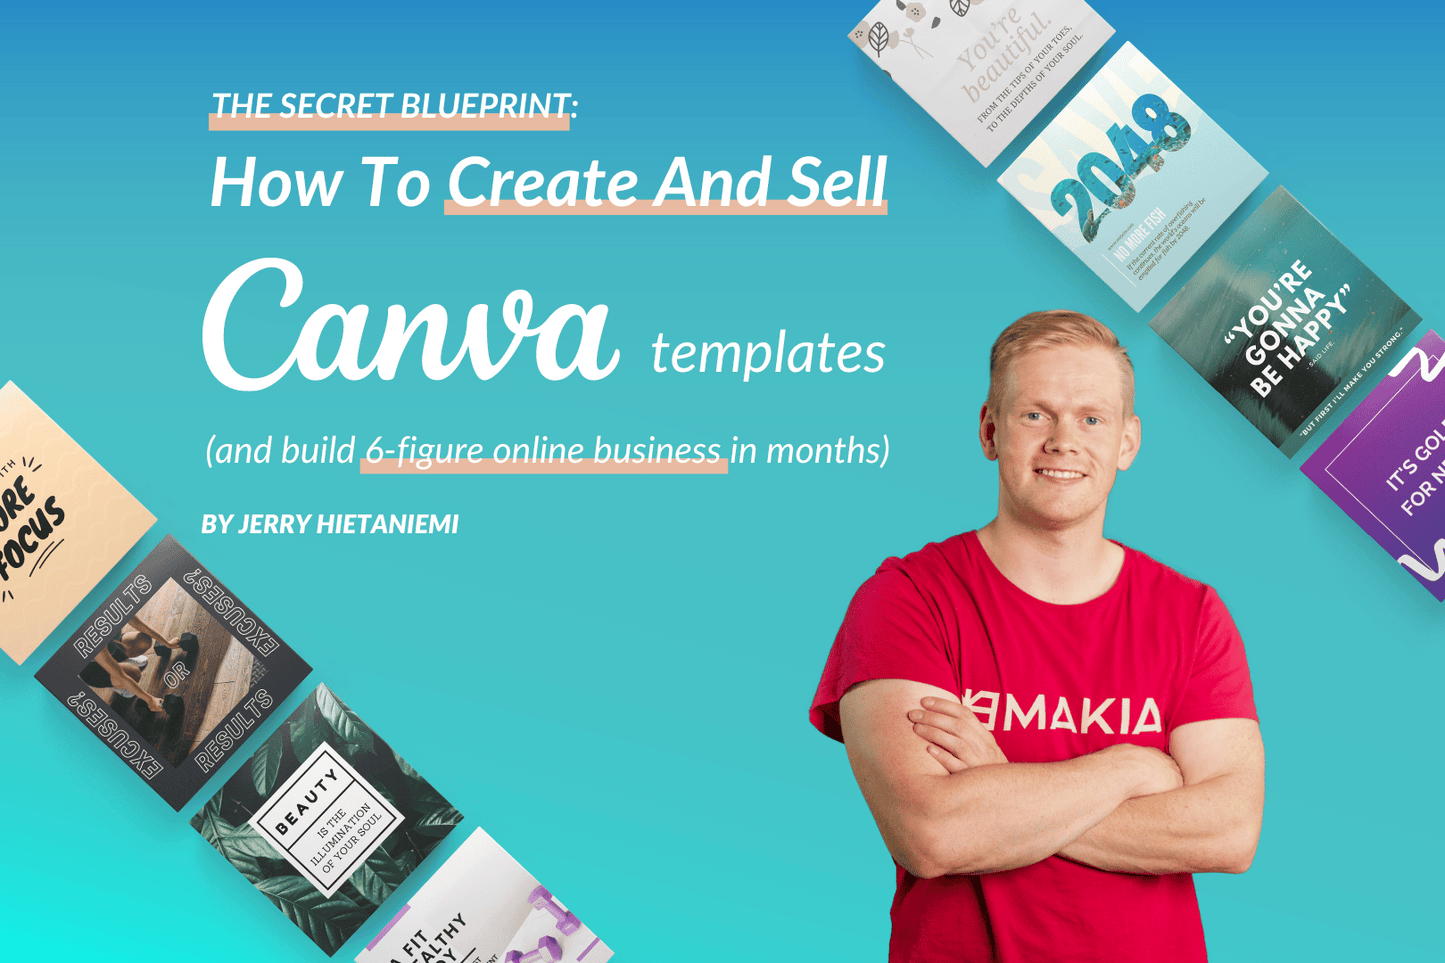 How to create and sell Canva templates